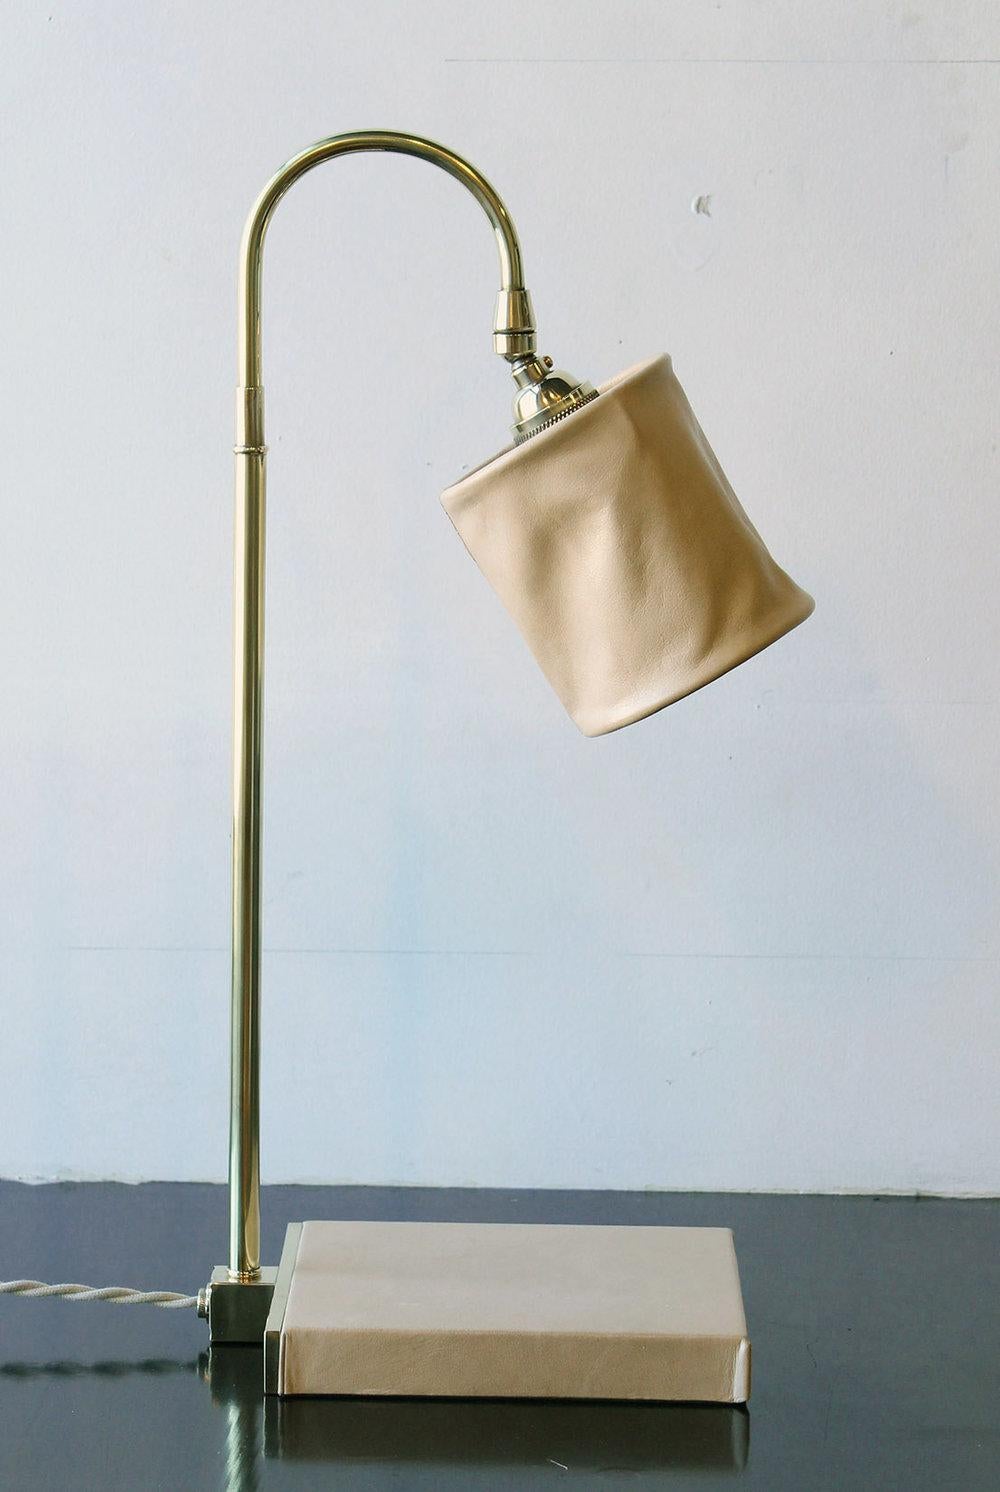 Series01 Desk Lamp, Hand-Dyed Ash 'Gray' Leather, Polished Unlacquered Brass For Sale 5